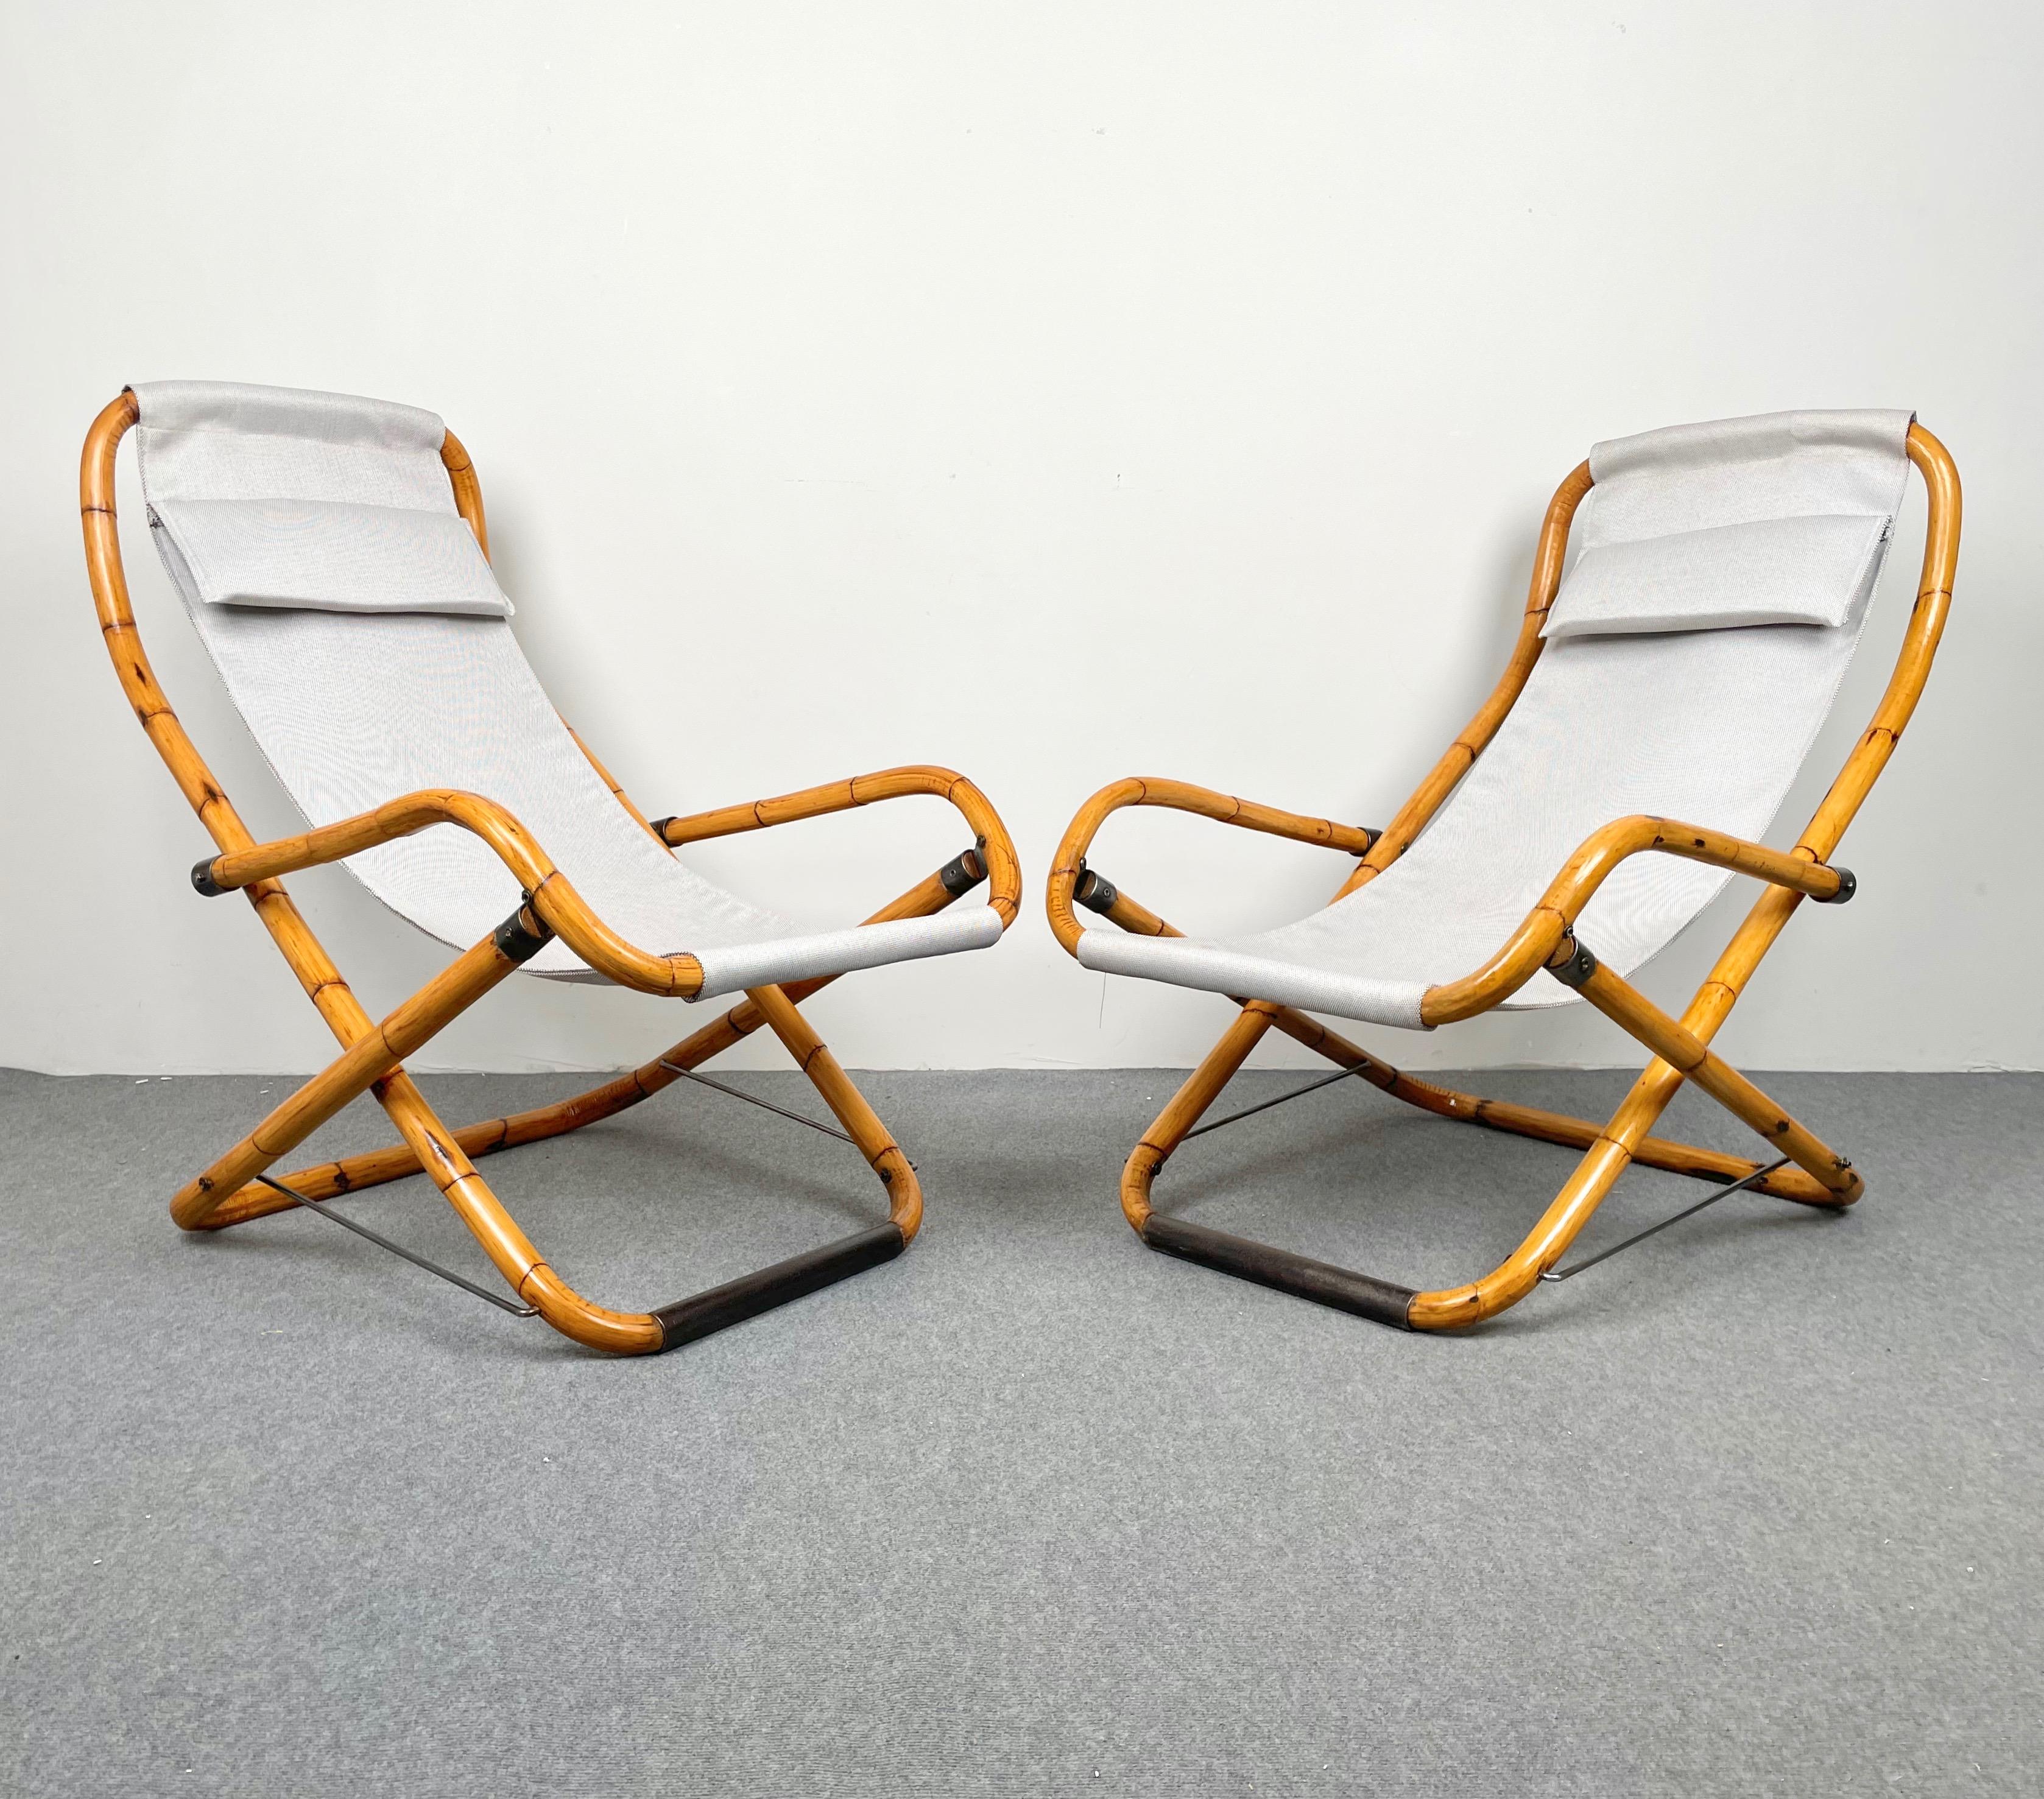 Pair of folding lounge deck chairs in bamboo and fabric made in Italy in the 1960s. 
The chairs have been restored: the fabric is new and the bamboo has been polished.